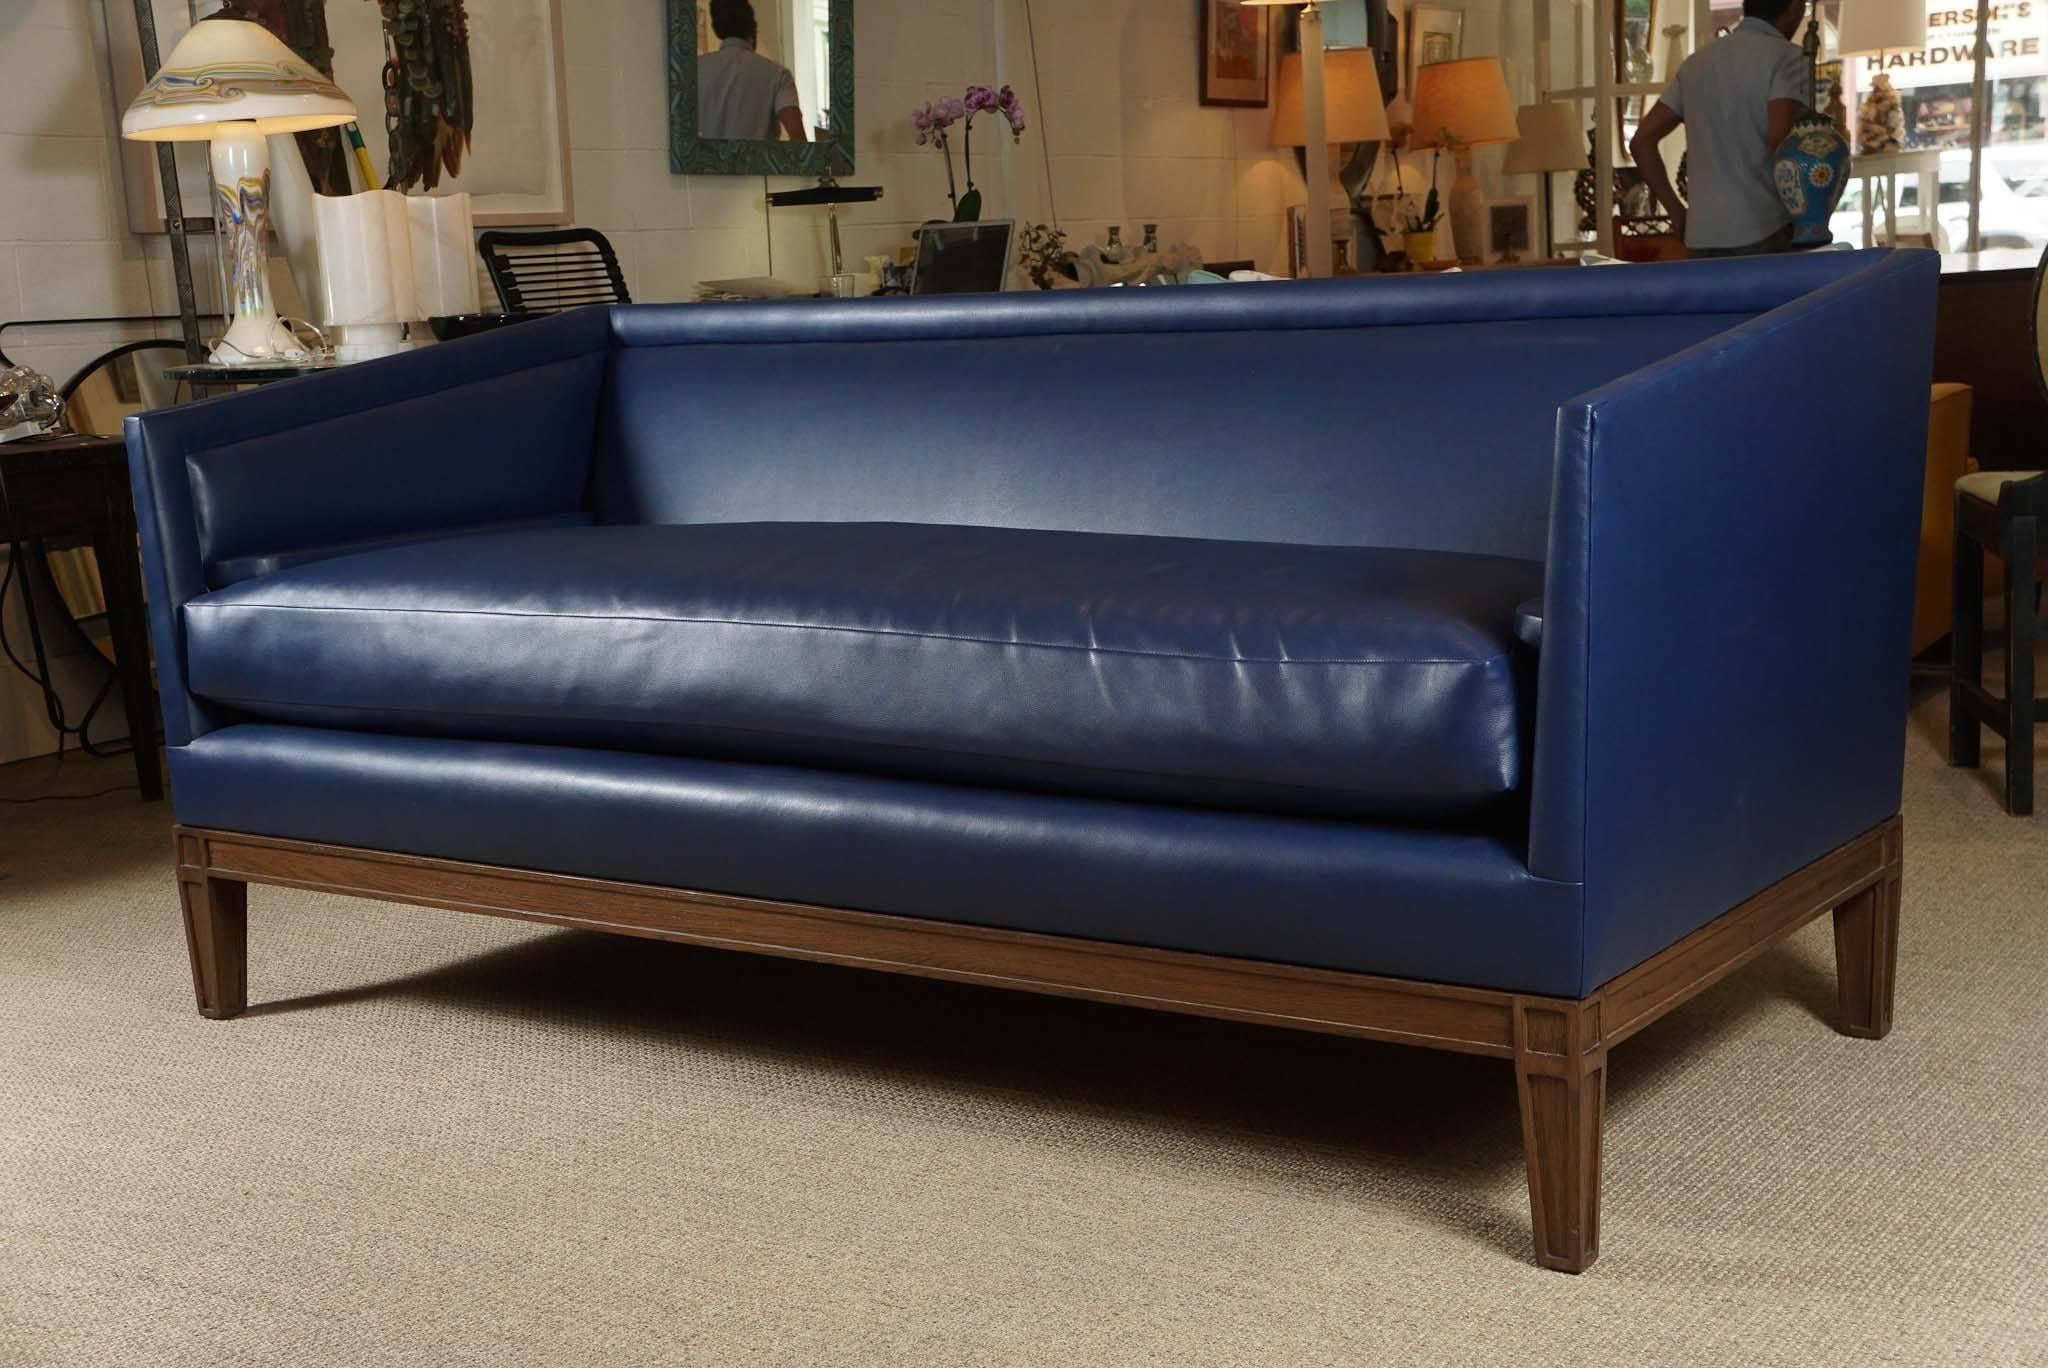 Here is a great boxed arm sofa in a blue faux leather with inset arms. The sofa is custom-made based on an original 1940s French Moderne sofa. The thick seat cushion is very plush. The wood finish is a medium walnut.